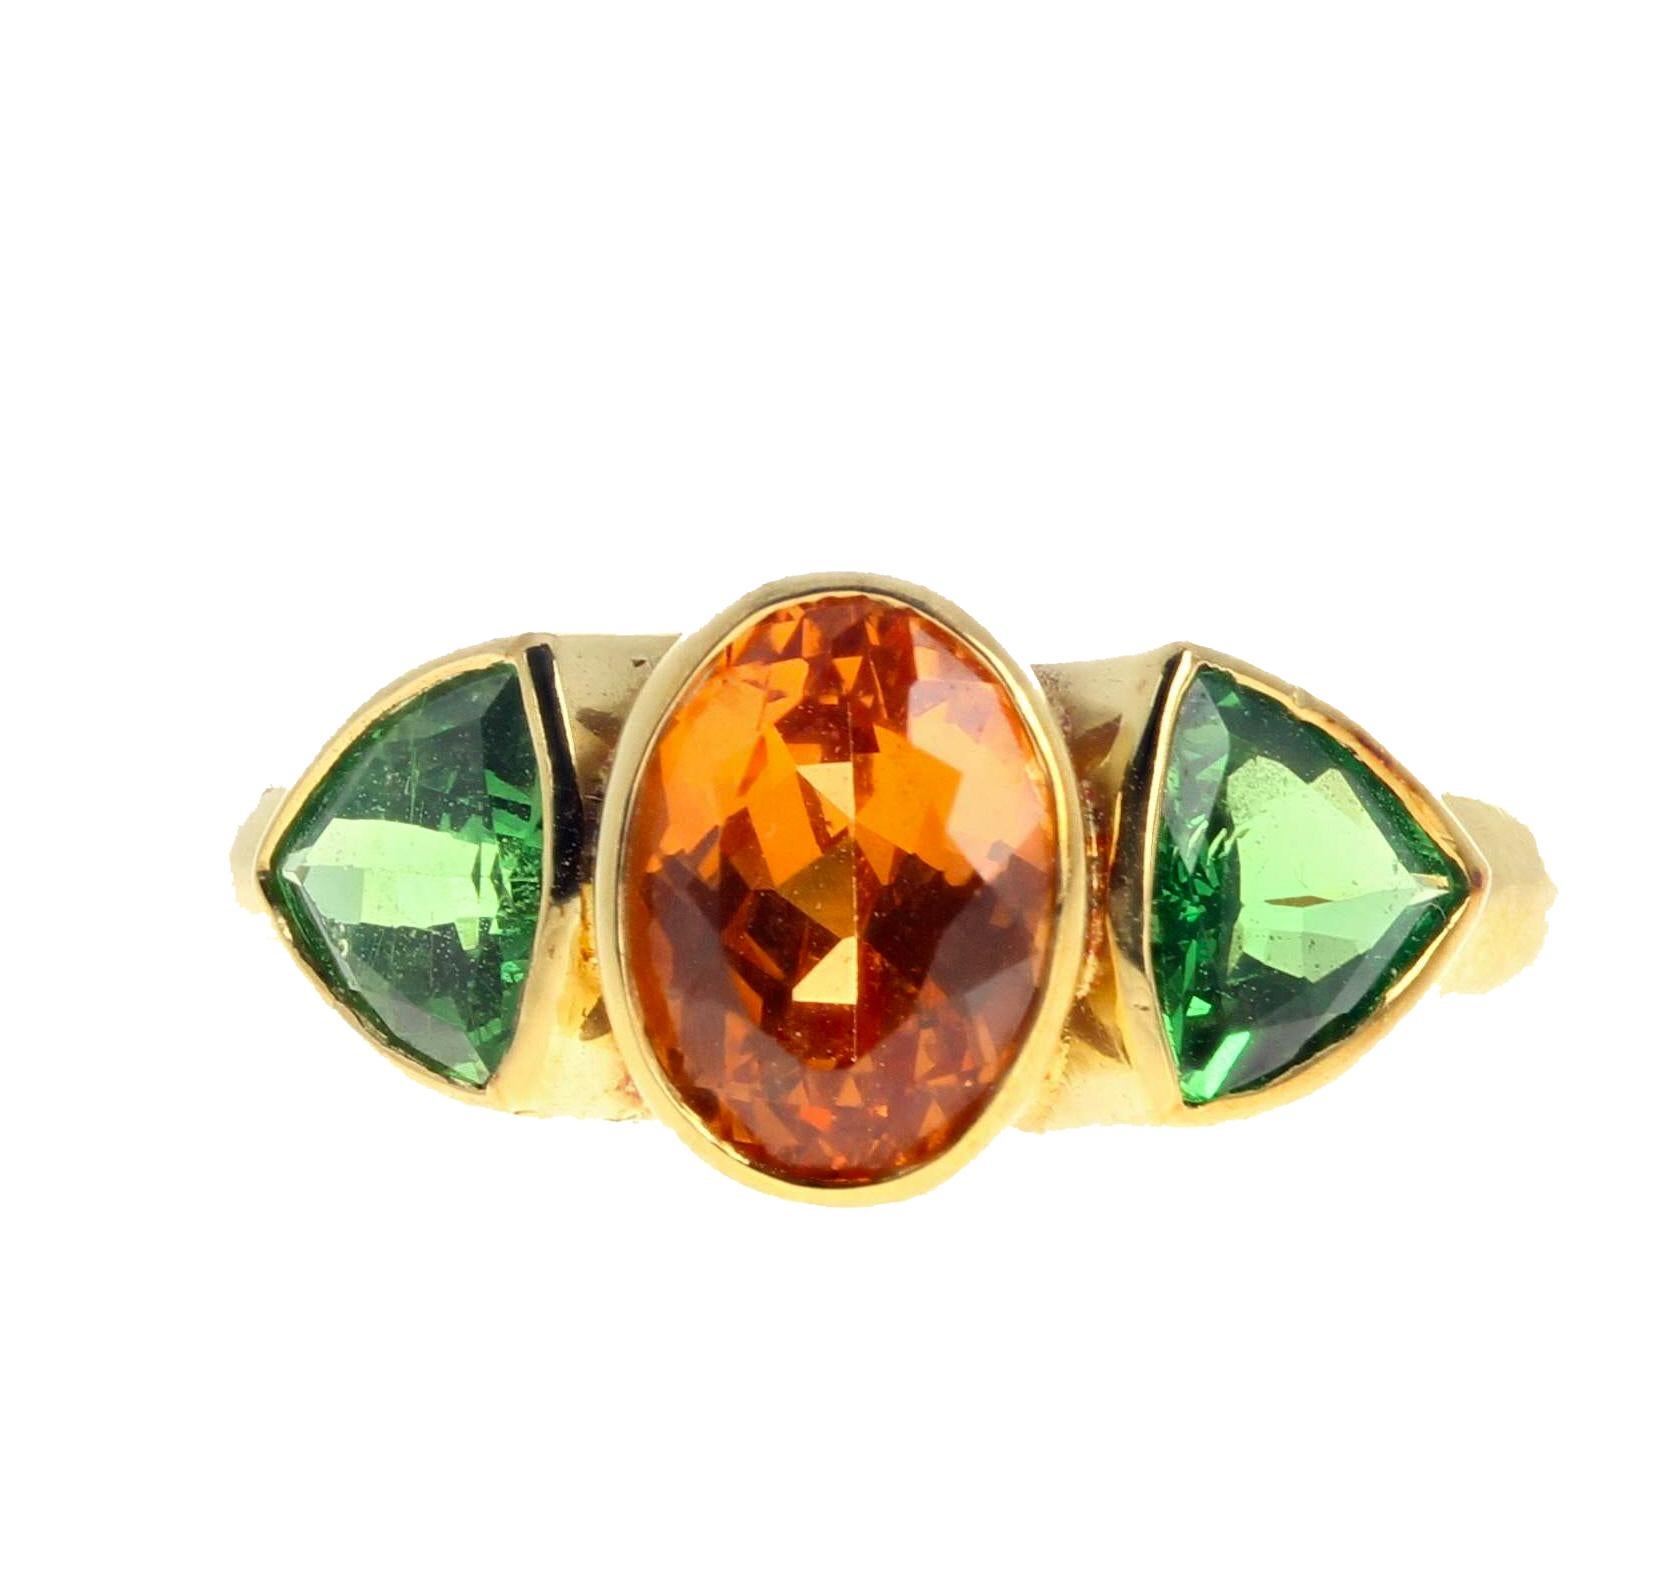 Beautiful center natural brilliant 2 Carat (exceedingly rare now) Spessartite (8.5mm x 6.3mm) enhanced with glittering green trillion Garnets (5.6 mm x 5.6 mm each and approximately 0.60 carats each) set in this 18K yellow gold ring size 7 (sizable